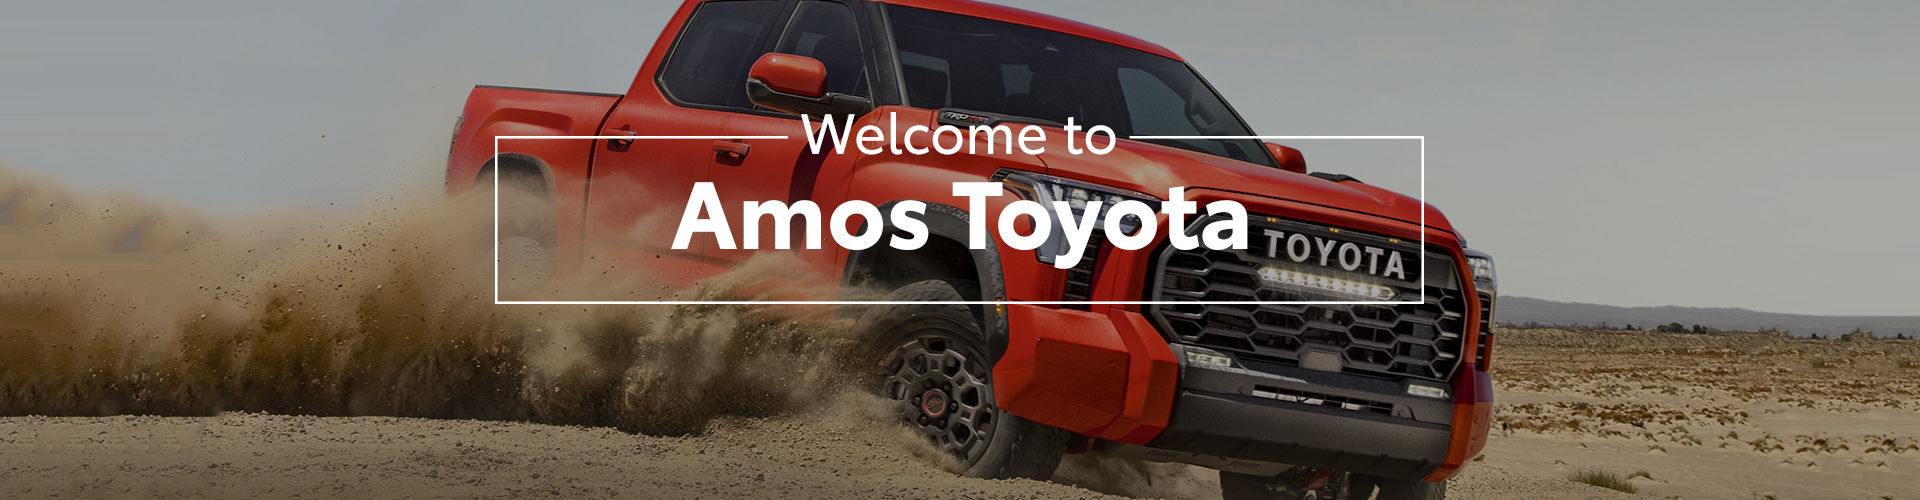 Welcome to Amos Toyota